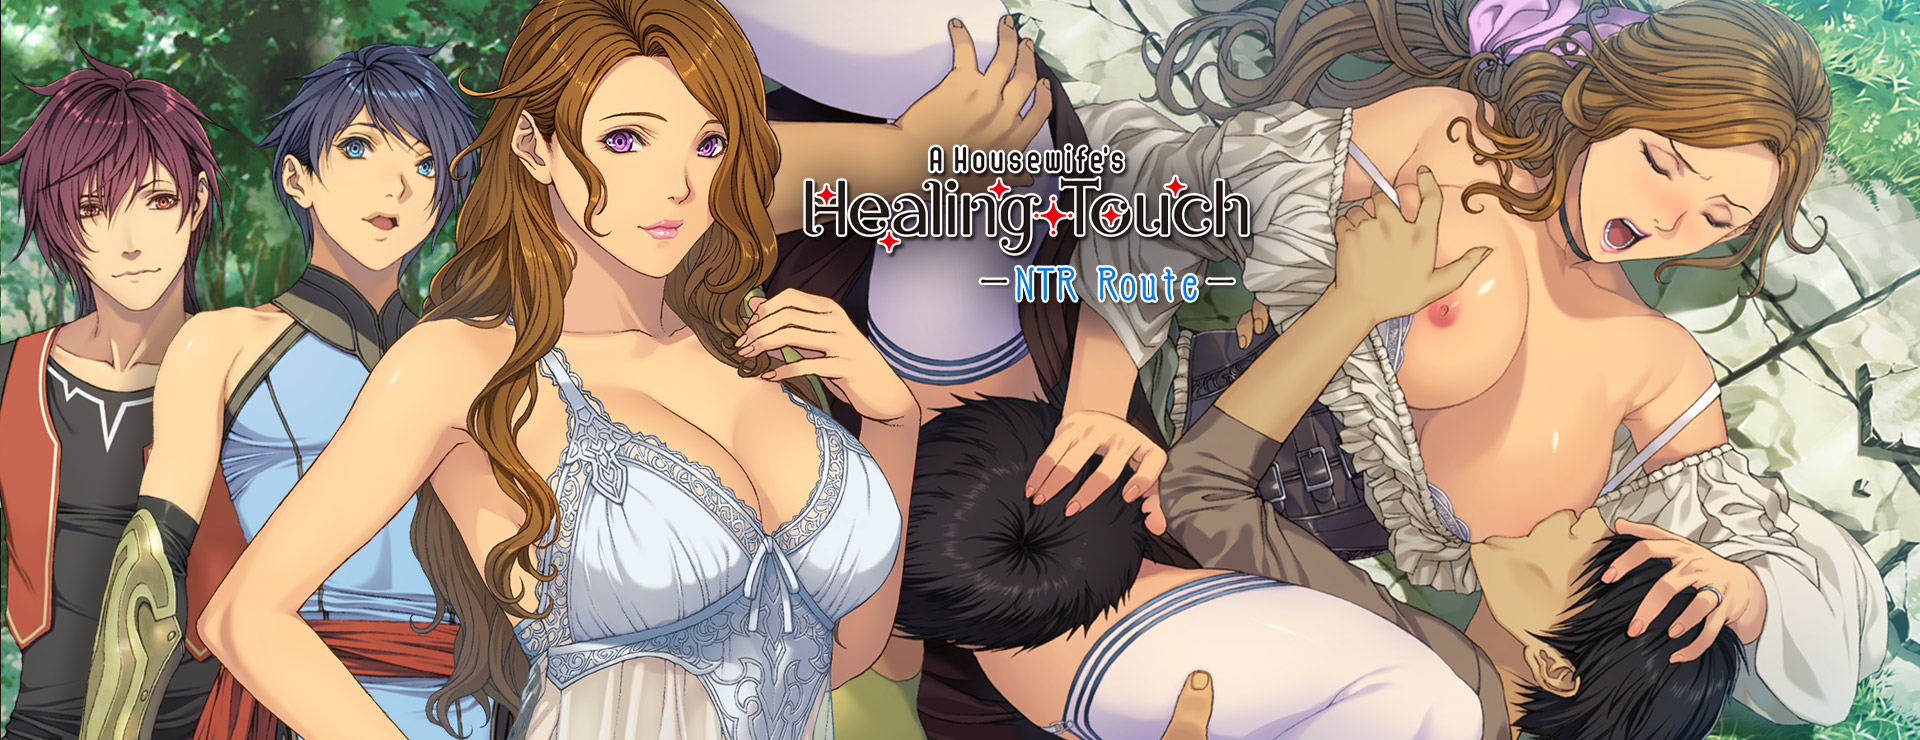 A Housewife's Healing Touch (NTR Route) - アクションアドベンチャー ゲーム